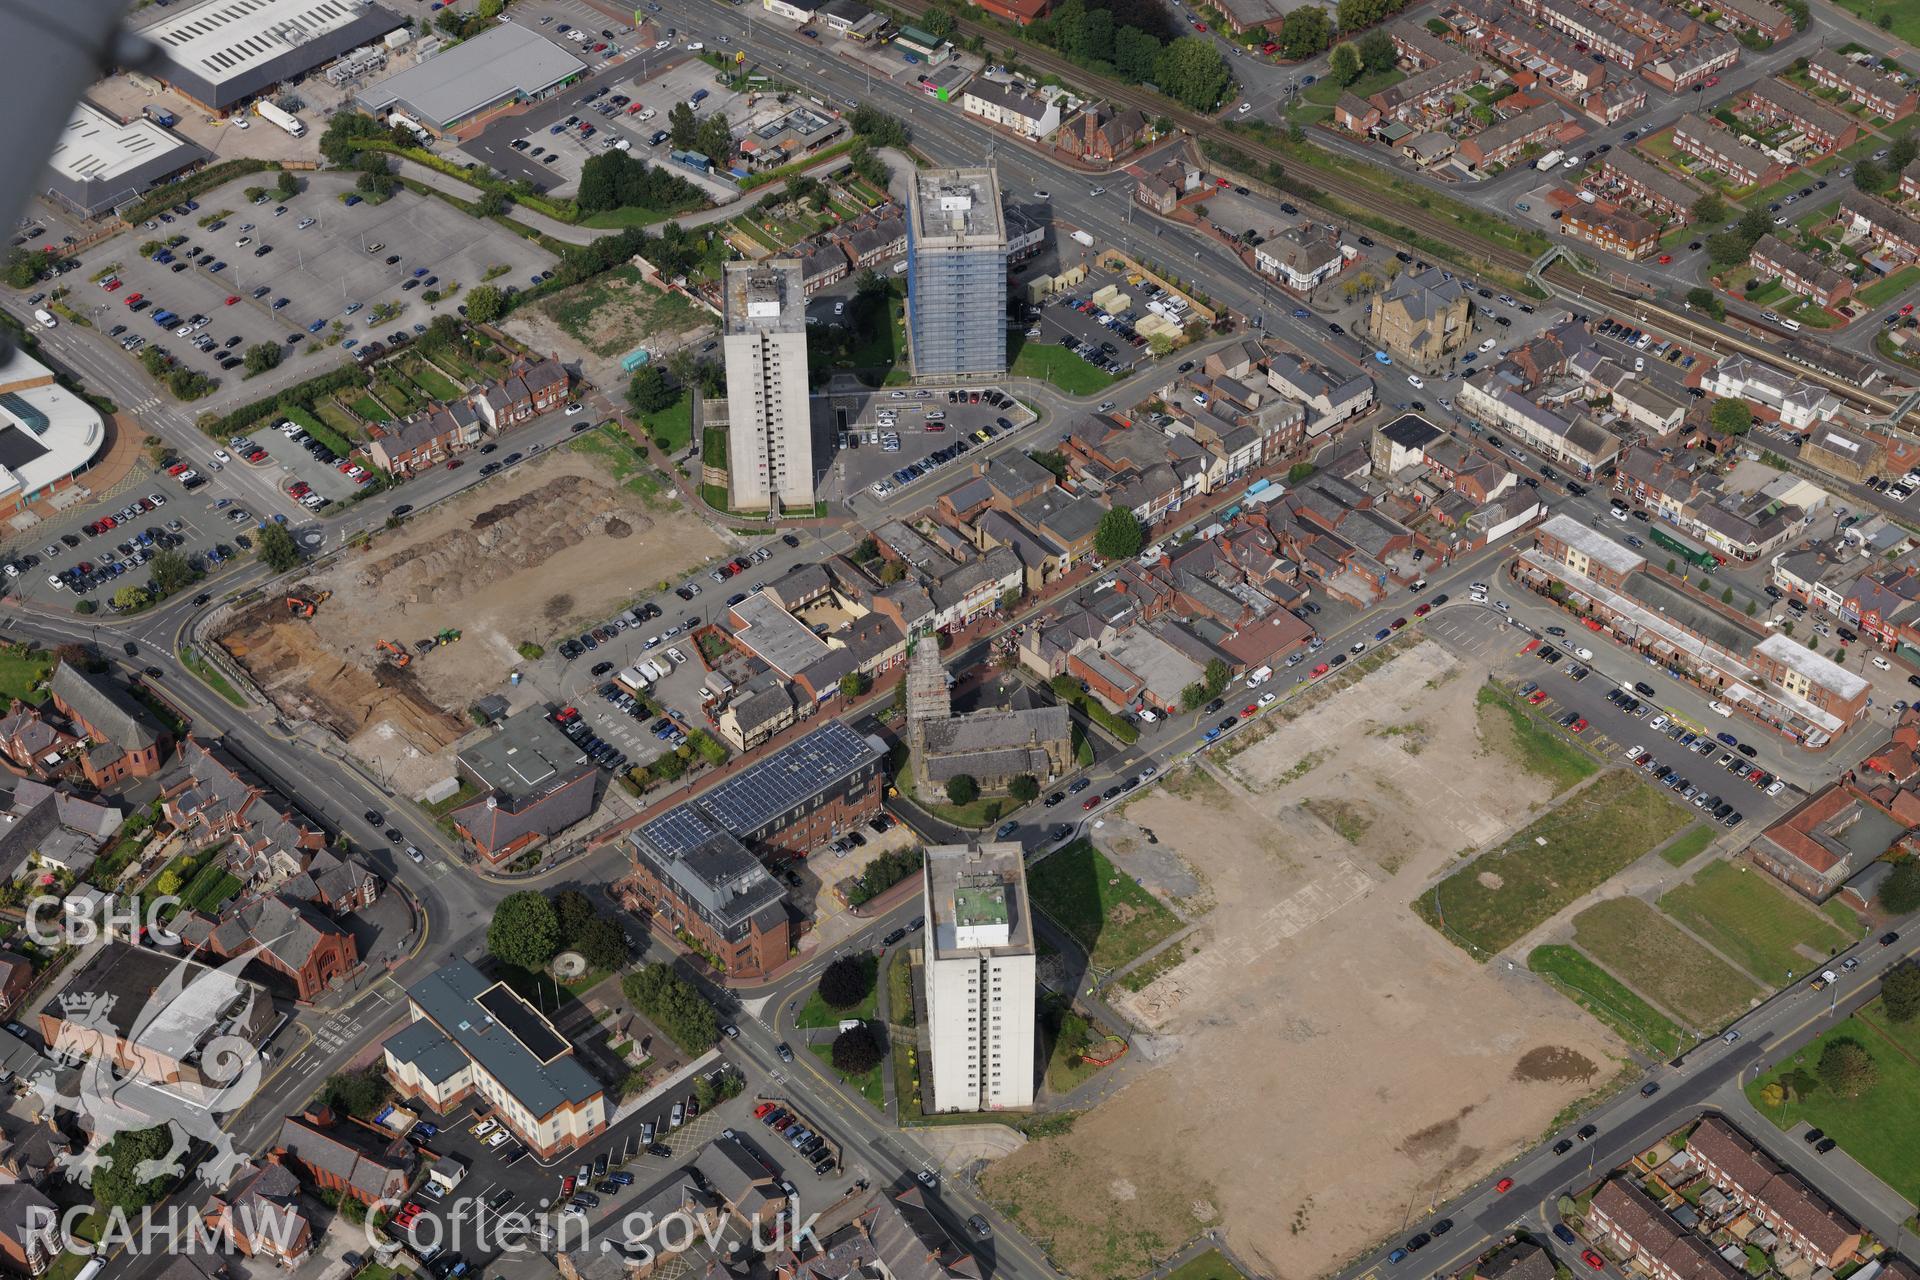 St. Mary's church and Flinshire Retail Centre on site of demolished housing estate, Flint. Oblique aerial photograph taken during the Royal Commission's programme of archaeological aerial reconnaissance by Toby Driver on 11th September 2015.